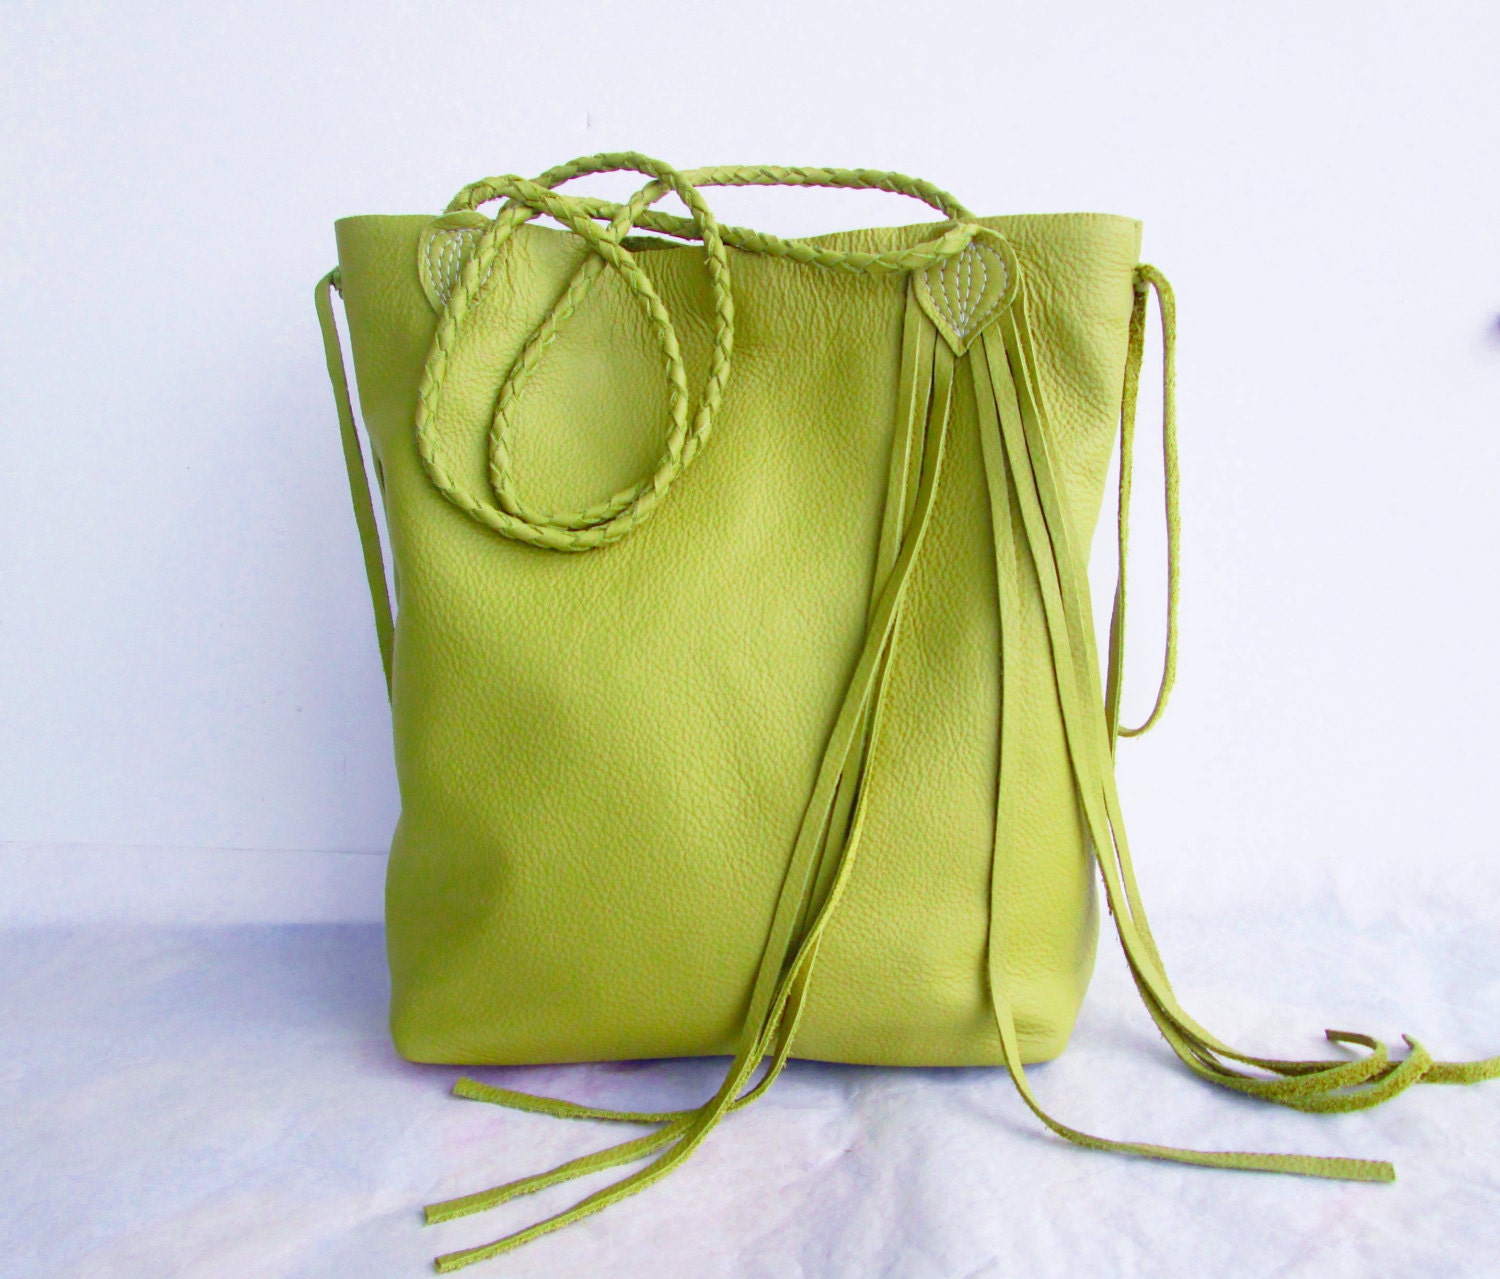 lime green leather handbag tote market bag with fringe by tuscada